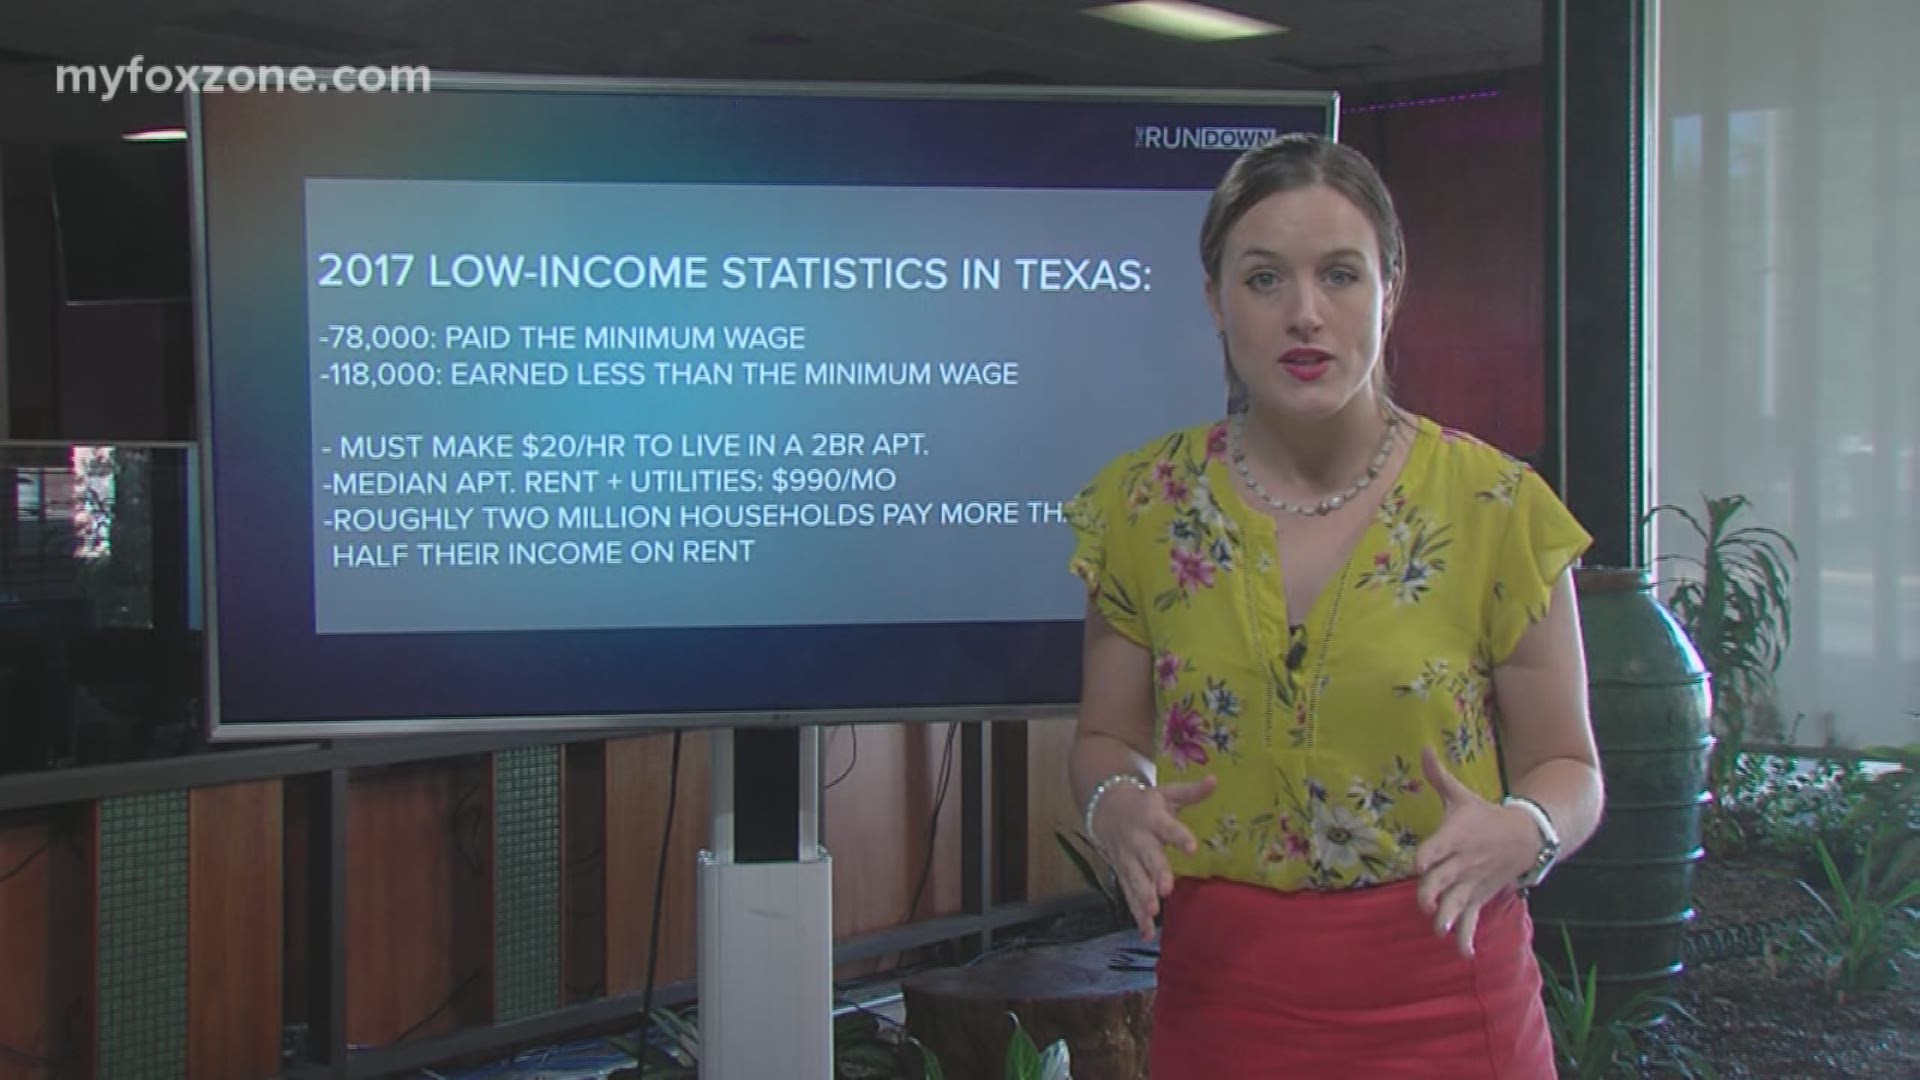 According to the National Low-Income Housing Coalition, people living in Texas must make about $20 per hour to afford a 2-bedroom apartment. 
That is nearly triple the amount of minimum wage at $7.25 an hour.